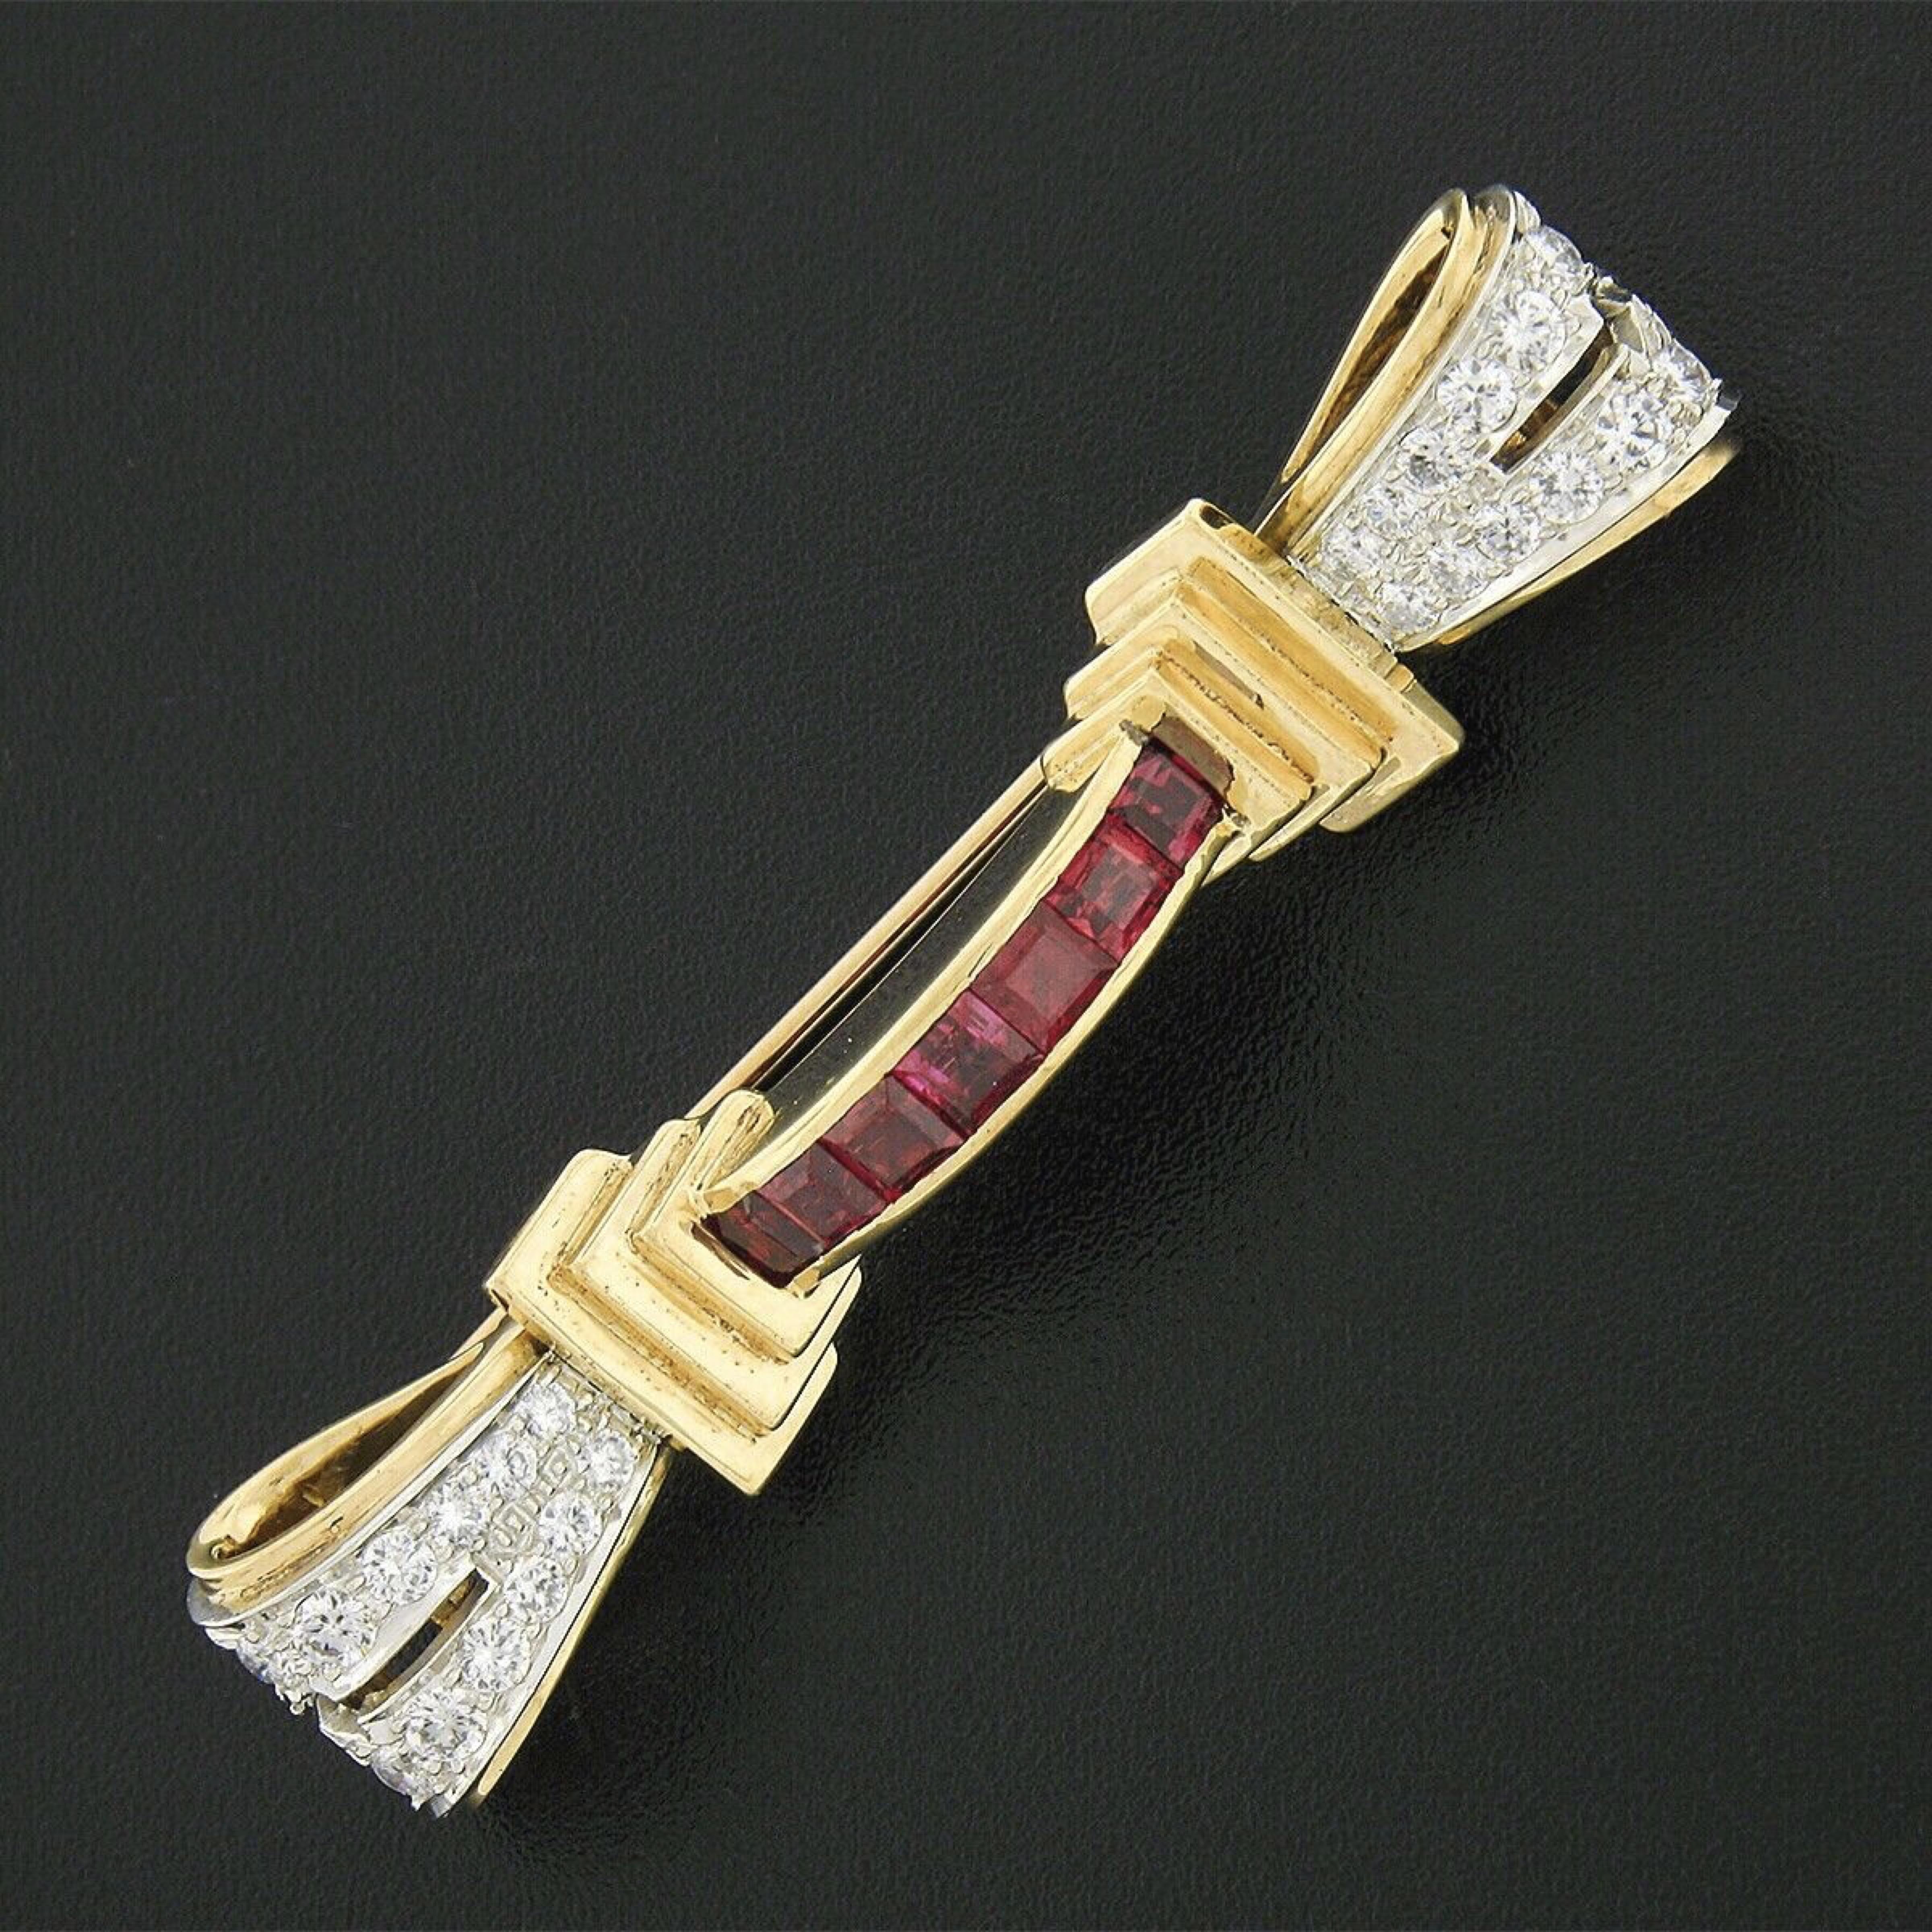 This marvelous retro vintage ribbon pin brooch was crafted from solid 14k rose gold and solid platinum, and is dated 1938. It features a set of 7 natural genuine square step cut rubies that have been certified by GIA as being 100% natural stones,